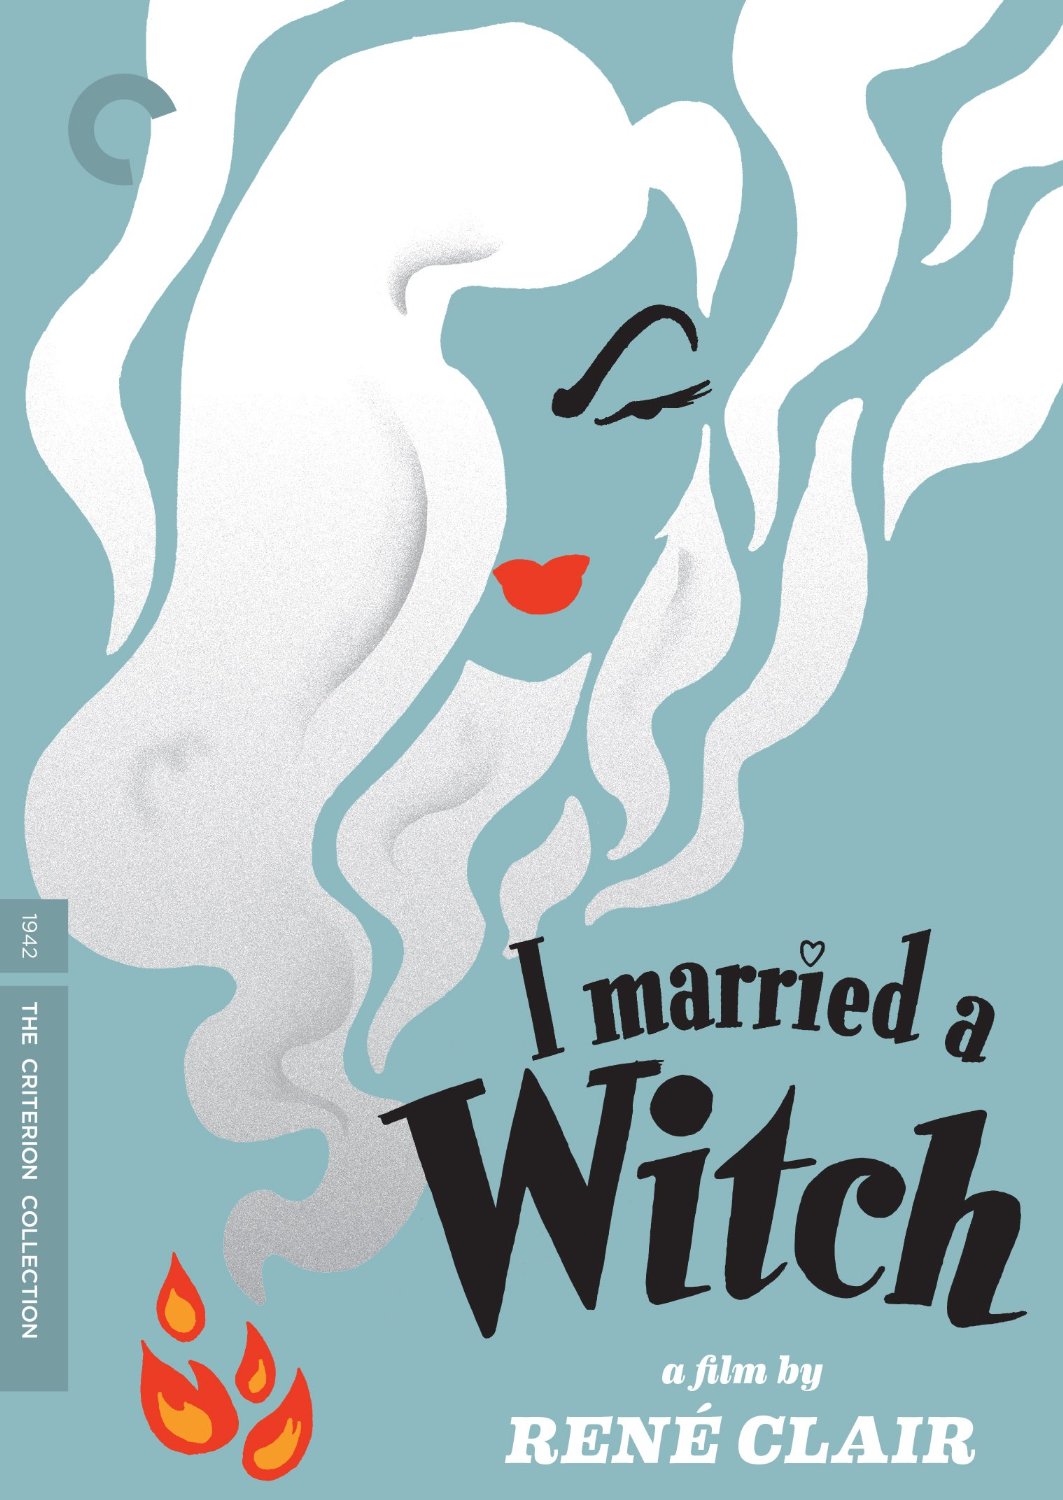 I Married a Witch, starring Frederic March, Veronica Lake, Cedric Kellaway